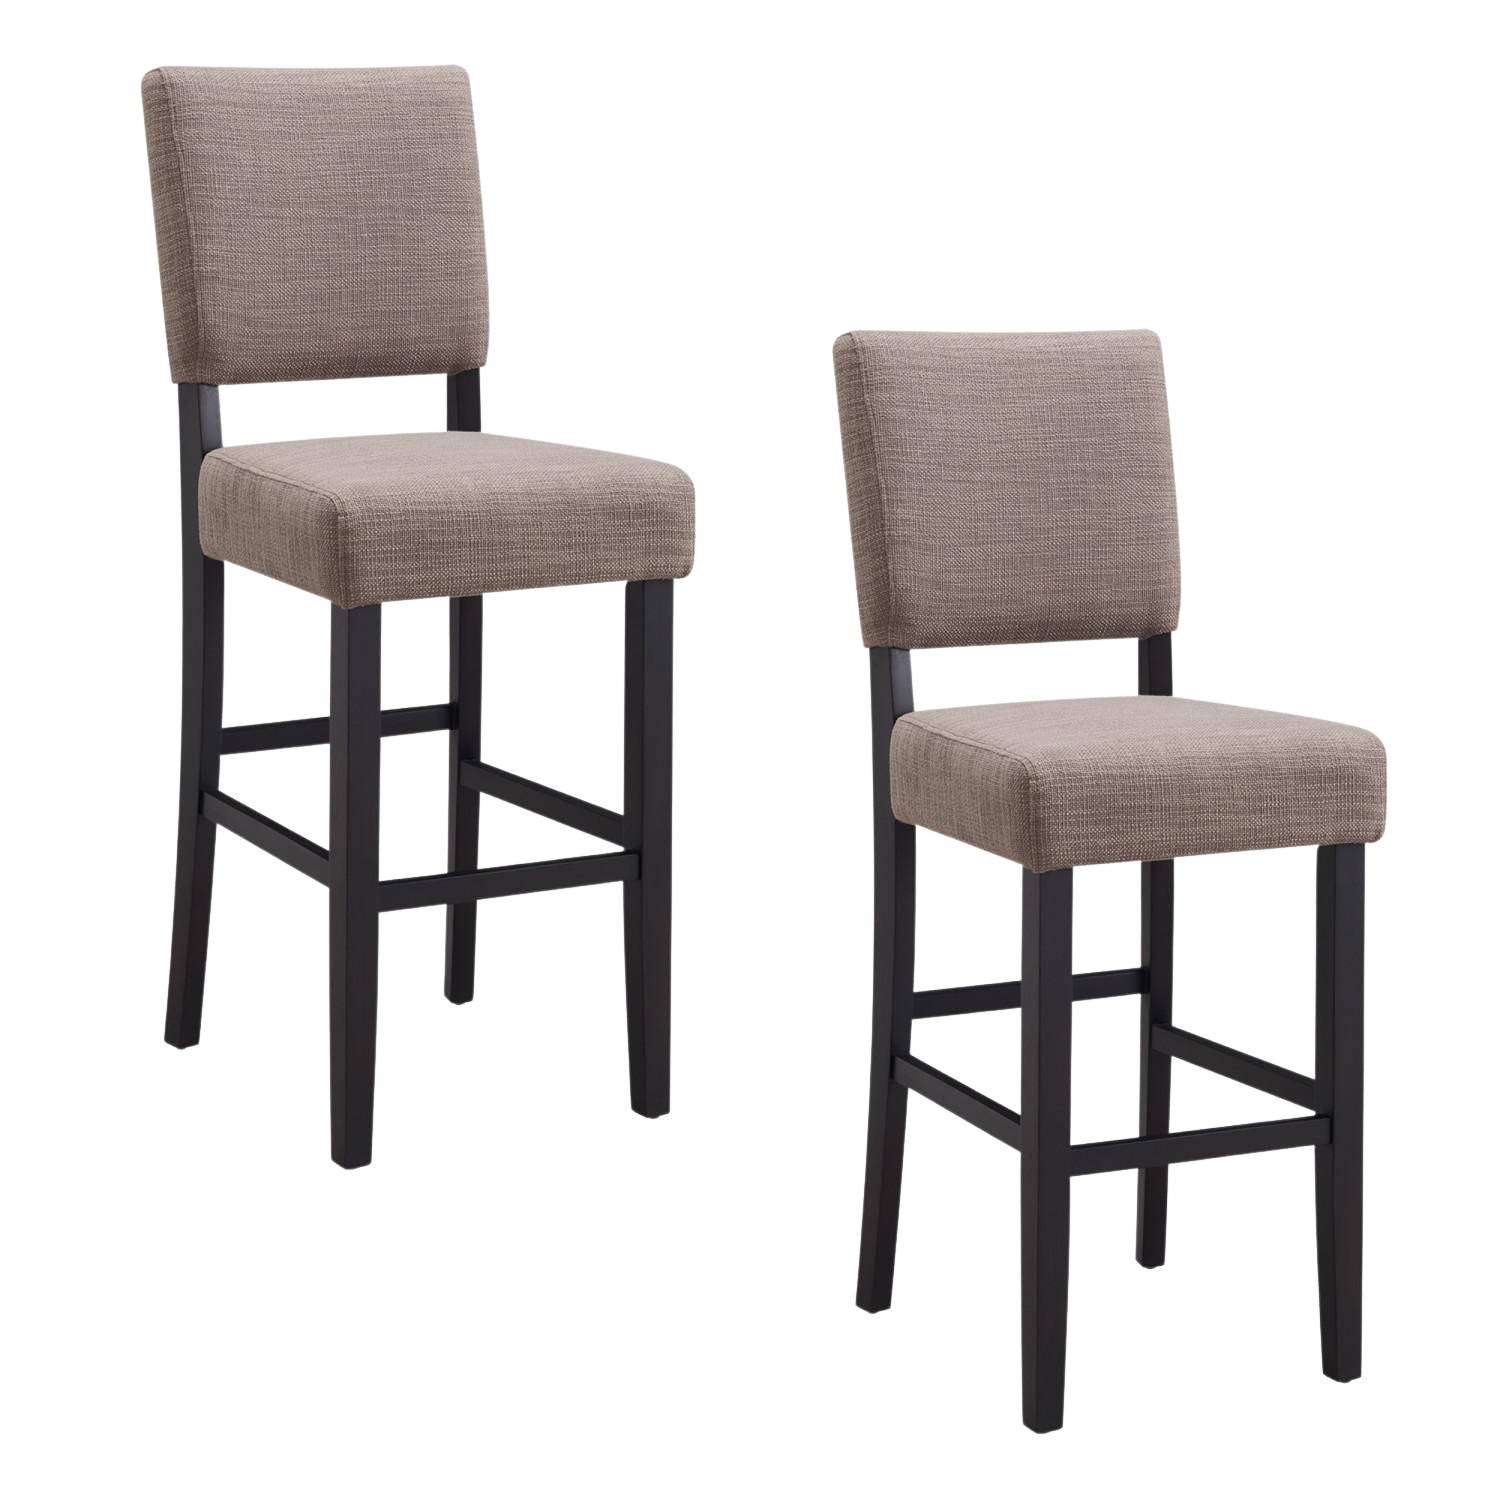 Leick Home, Leick Home 10087-BLKGL Bar Stool in Black and Gray Set of 2 New